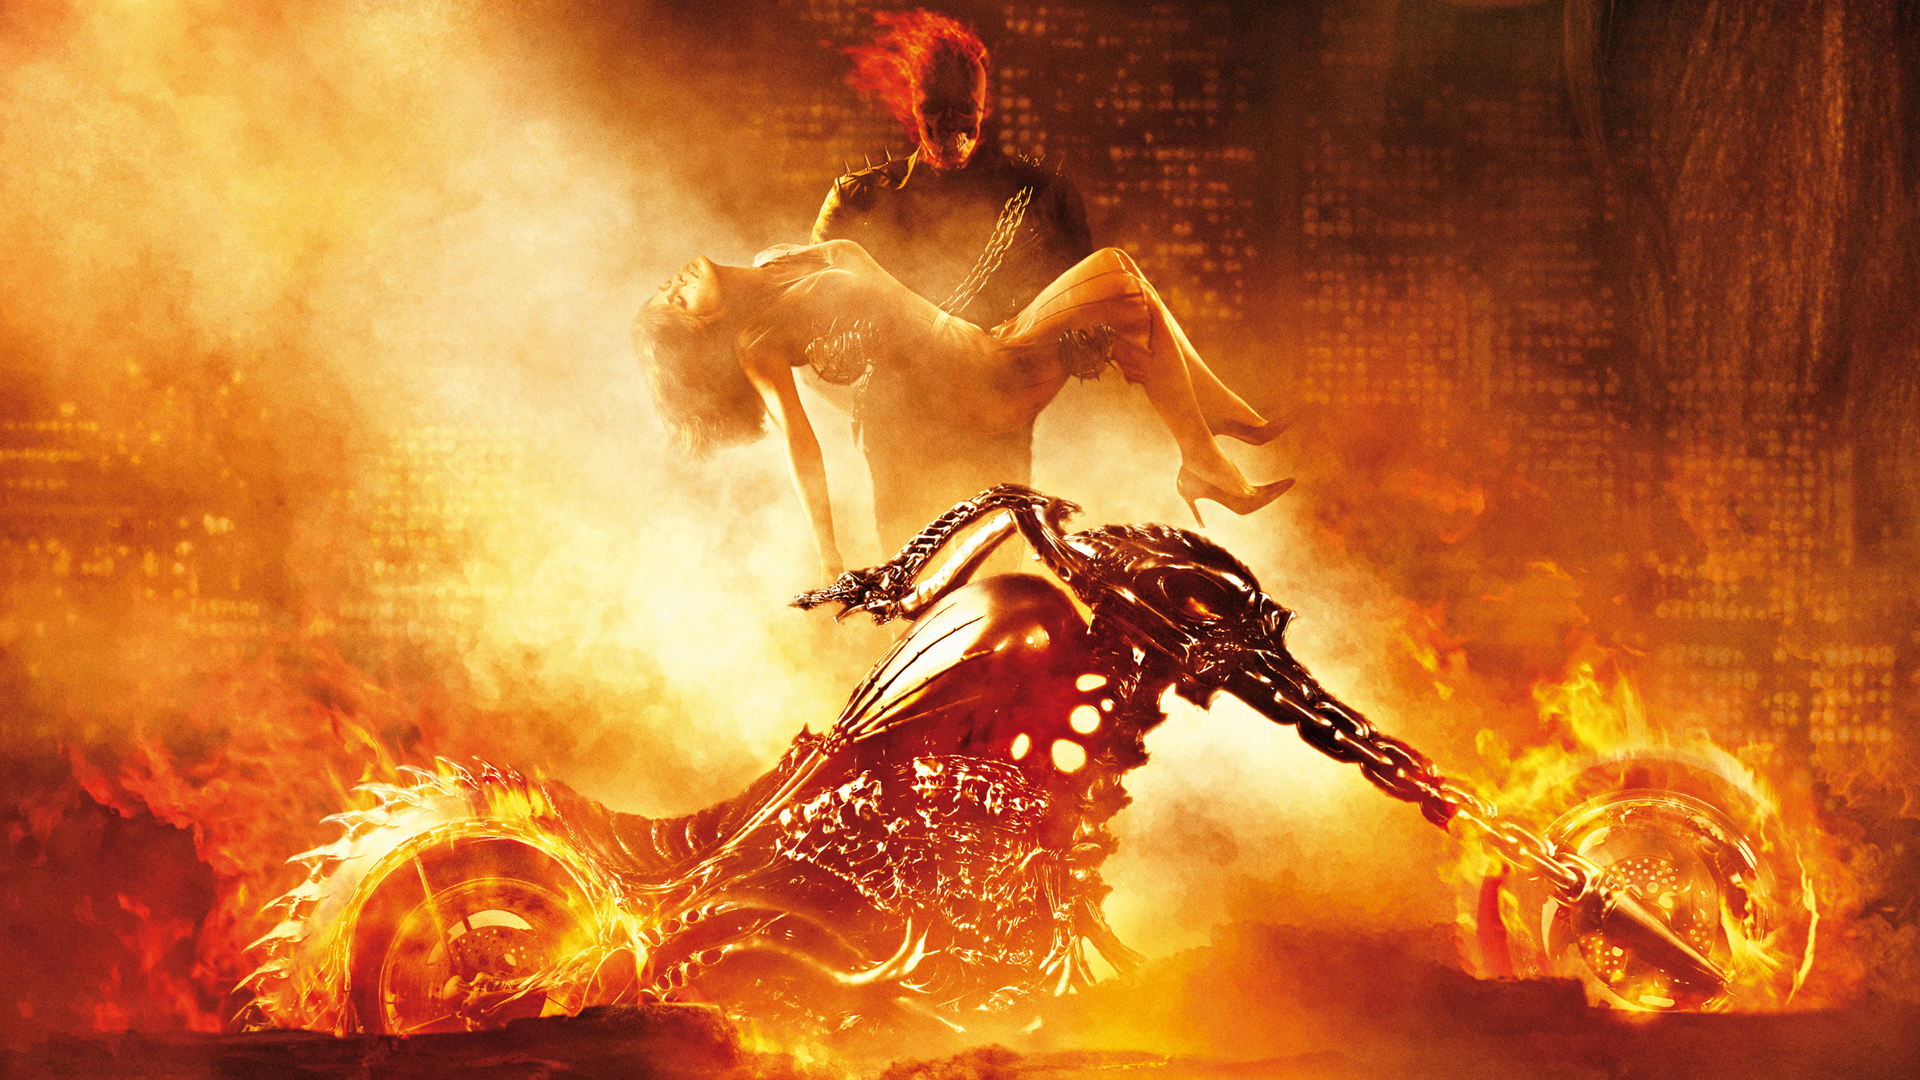 Free HQ Ghost Rider Wallpaper   Free HQ Wallpapers